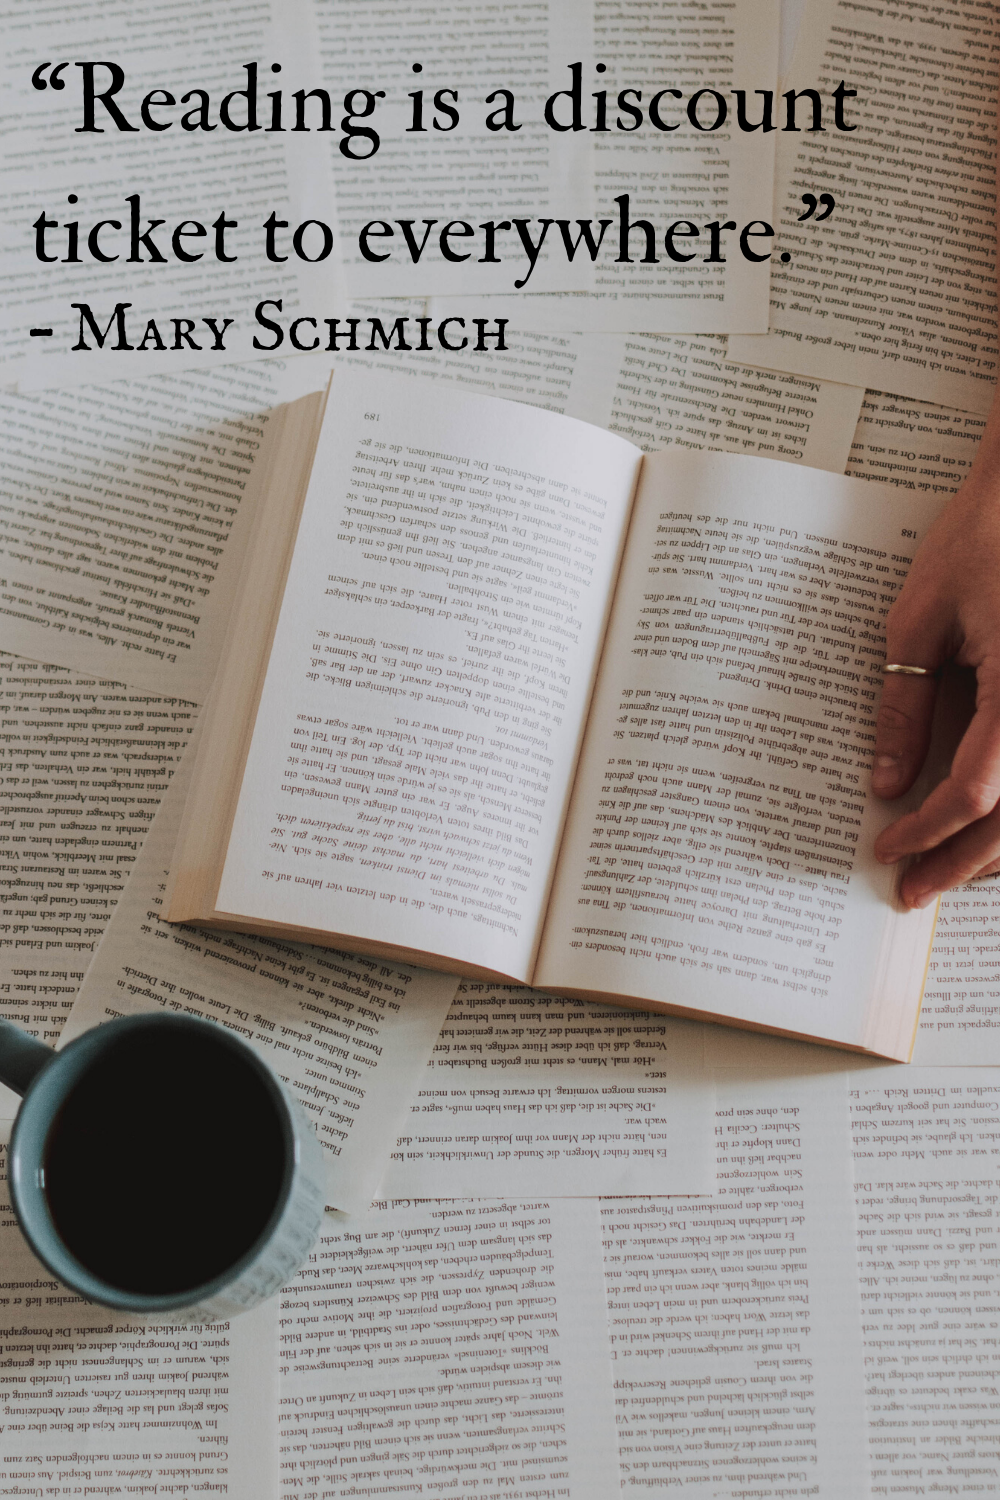 Reading Is A Discount Ticket To Everywhere. -Mary Schmich